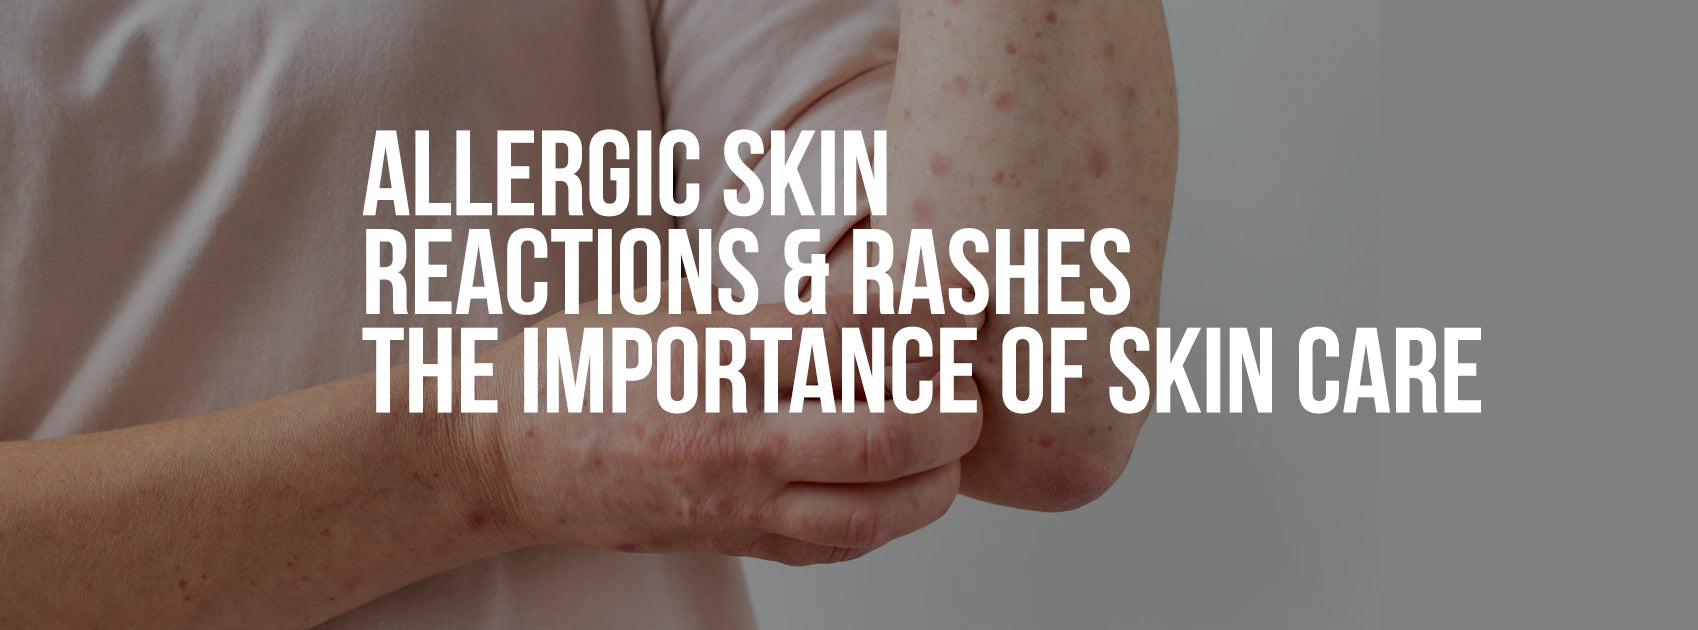 Allergic Skin Reactions & Rashes – The importance of Skin Care